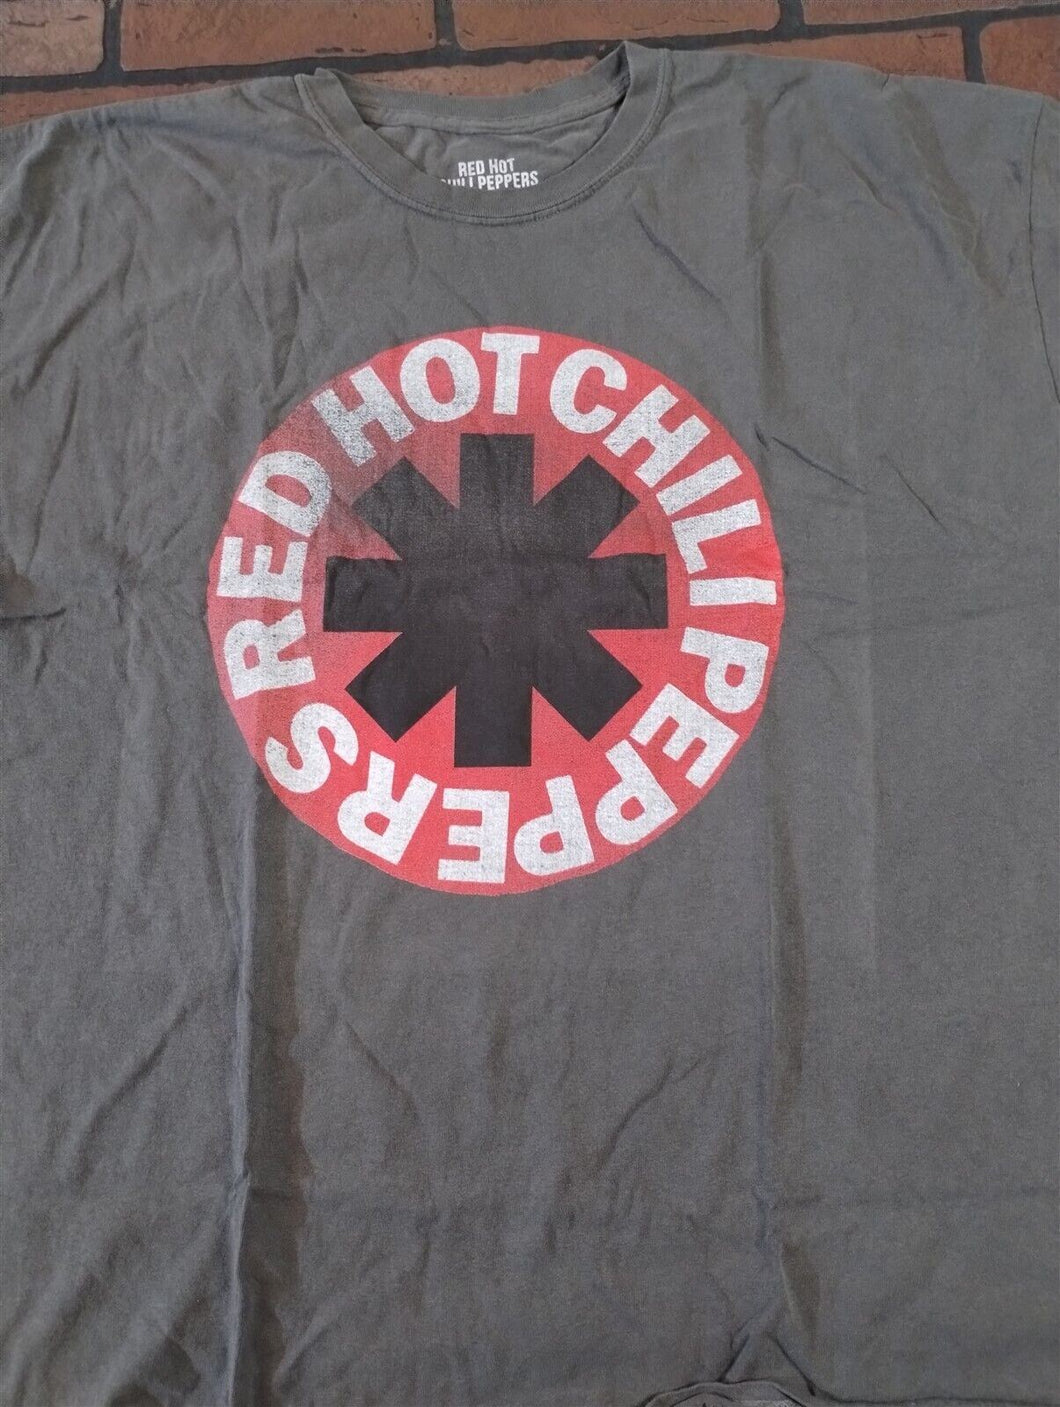 RED HOT CHILI PEPPERS - 2020 Distressed 2 sided T-shirt ~Licensed/New~ S/M L/XL